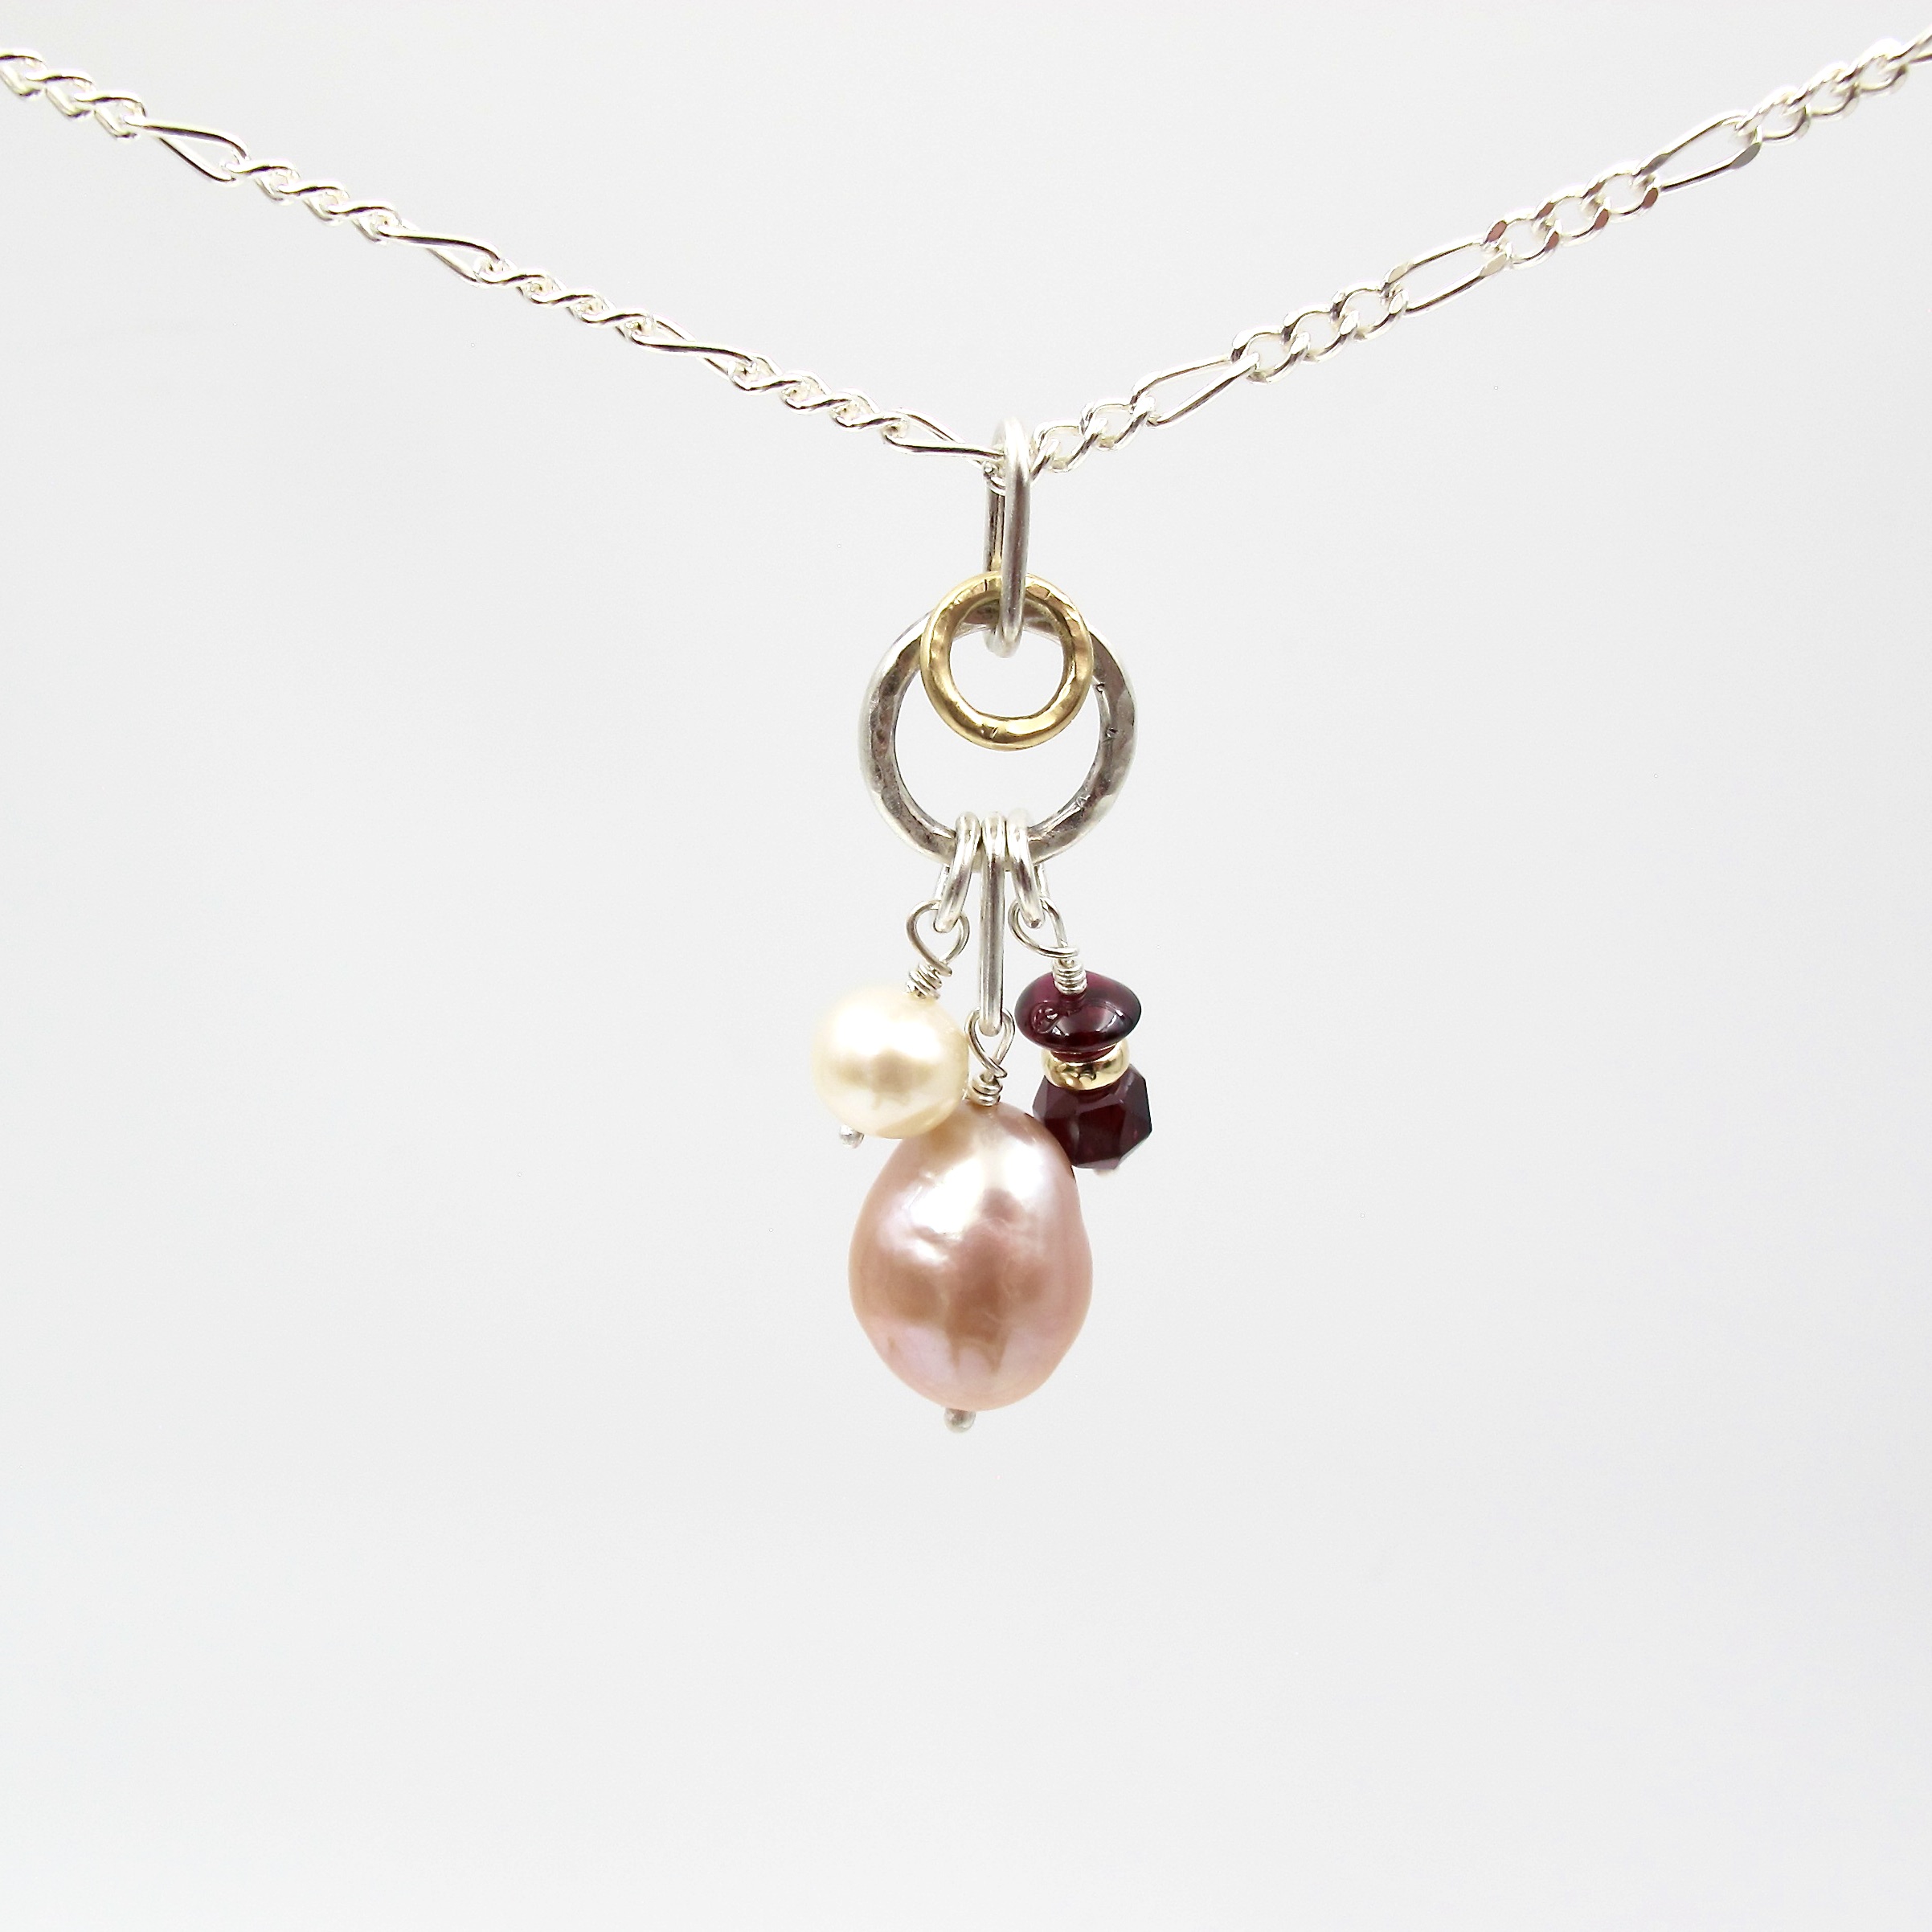 Pearls, baroque pearls, pearl necklace, garnet, gold, silver, necklace, jewelry